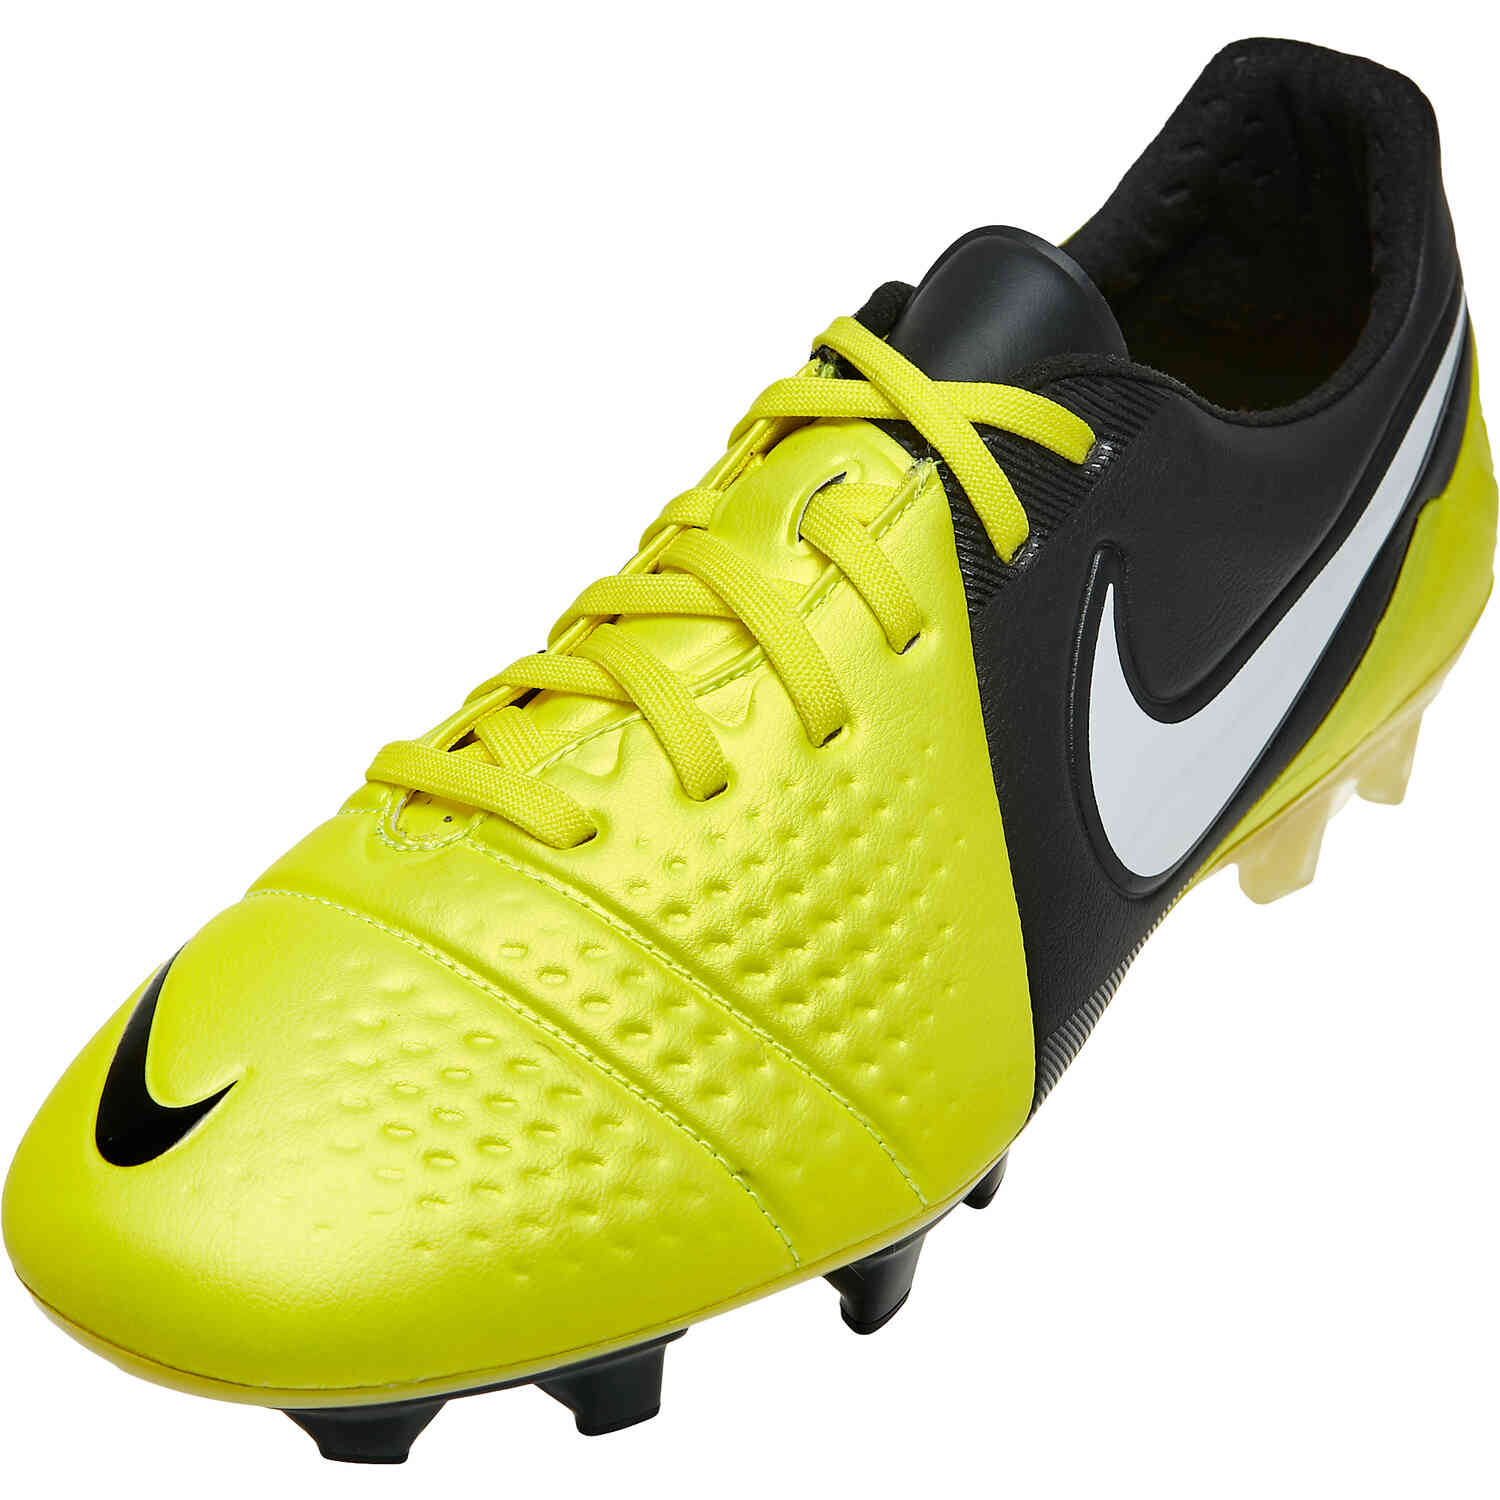 Nike Special Edition CTR360 Maestri III FG - Tour Yellow & Black with - SoccerPro